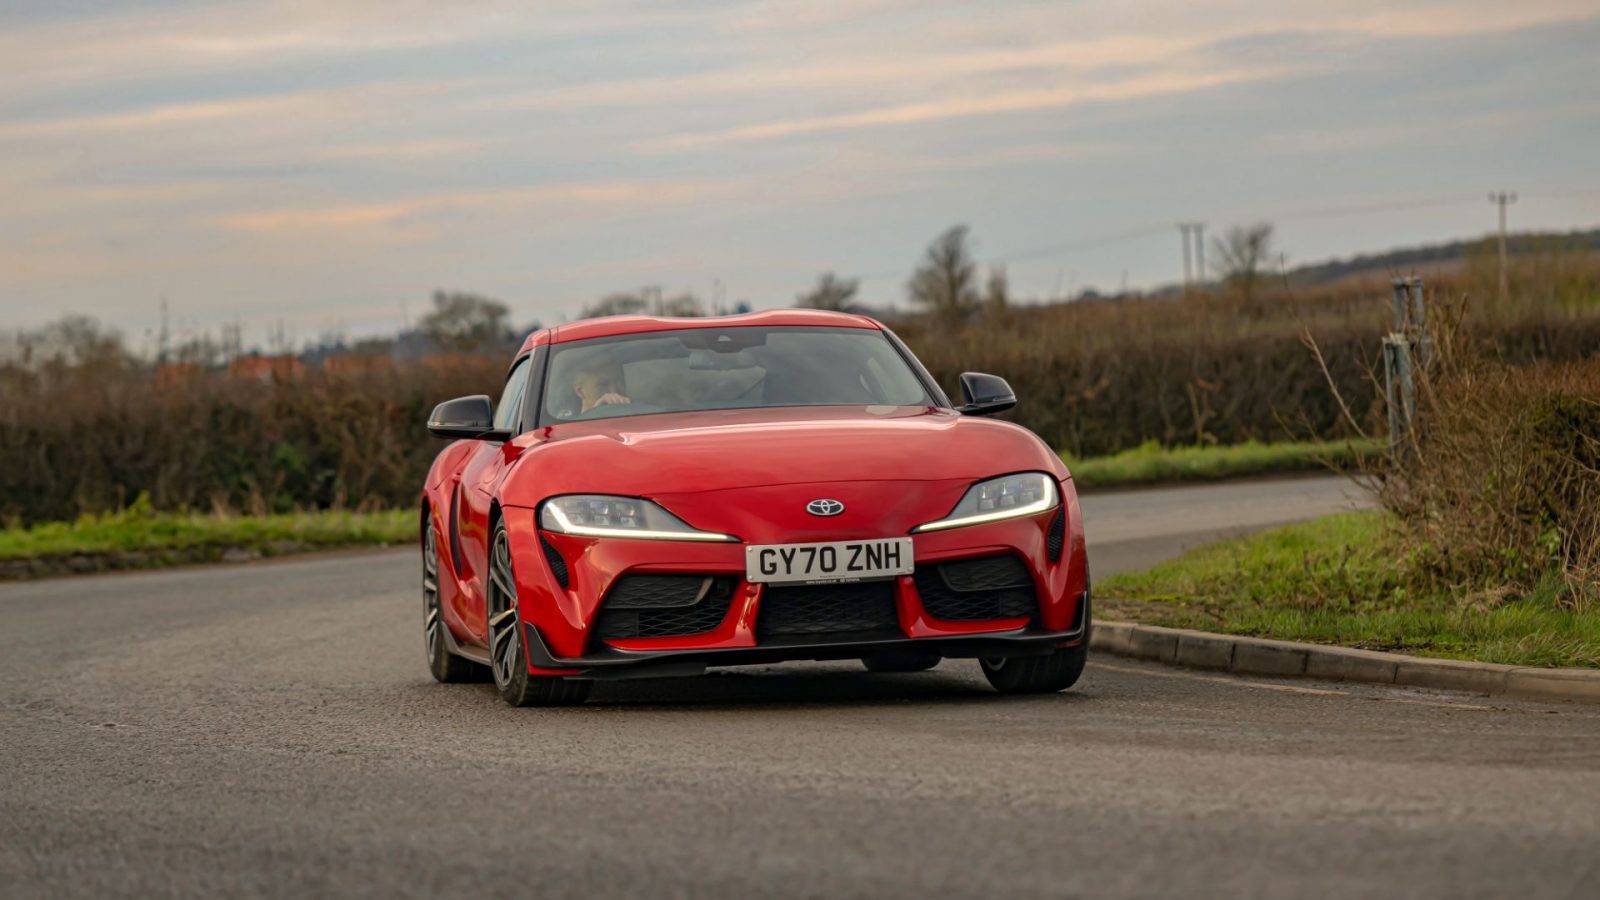 Toyota Supra 2.0 review: no replacement for displacement : CityAM